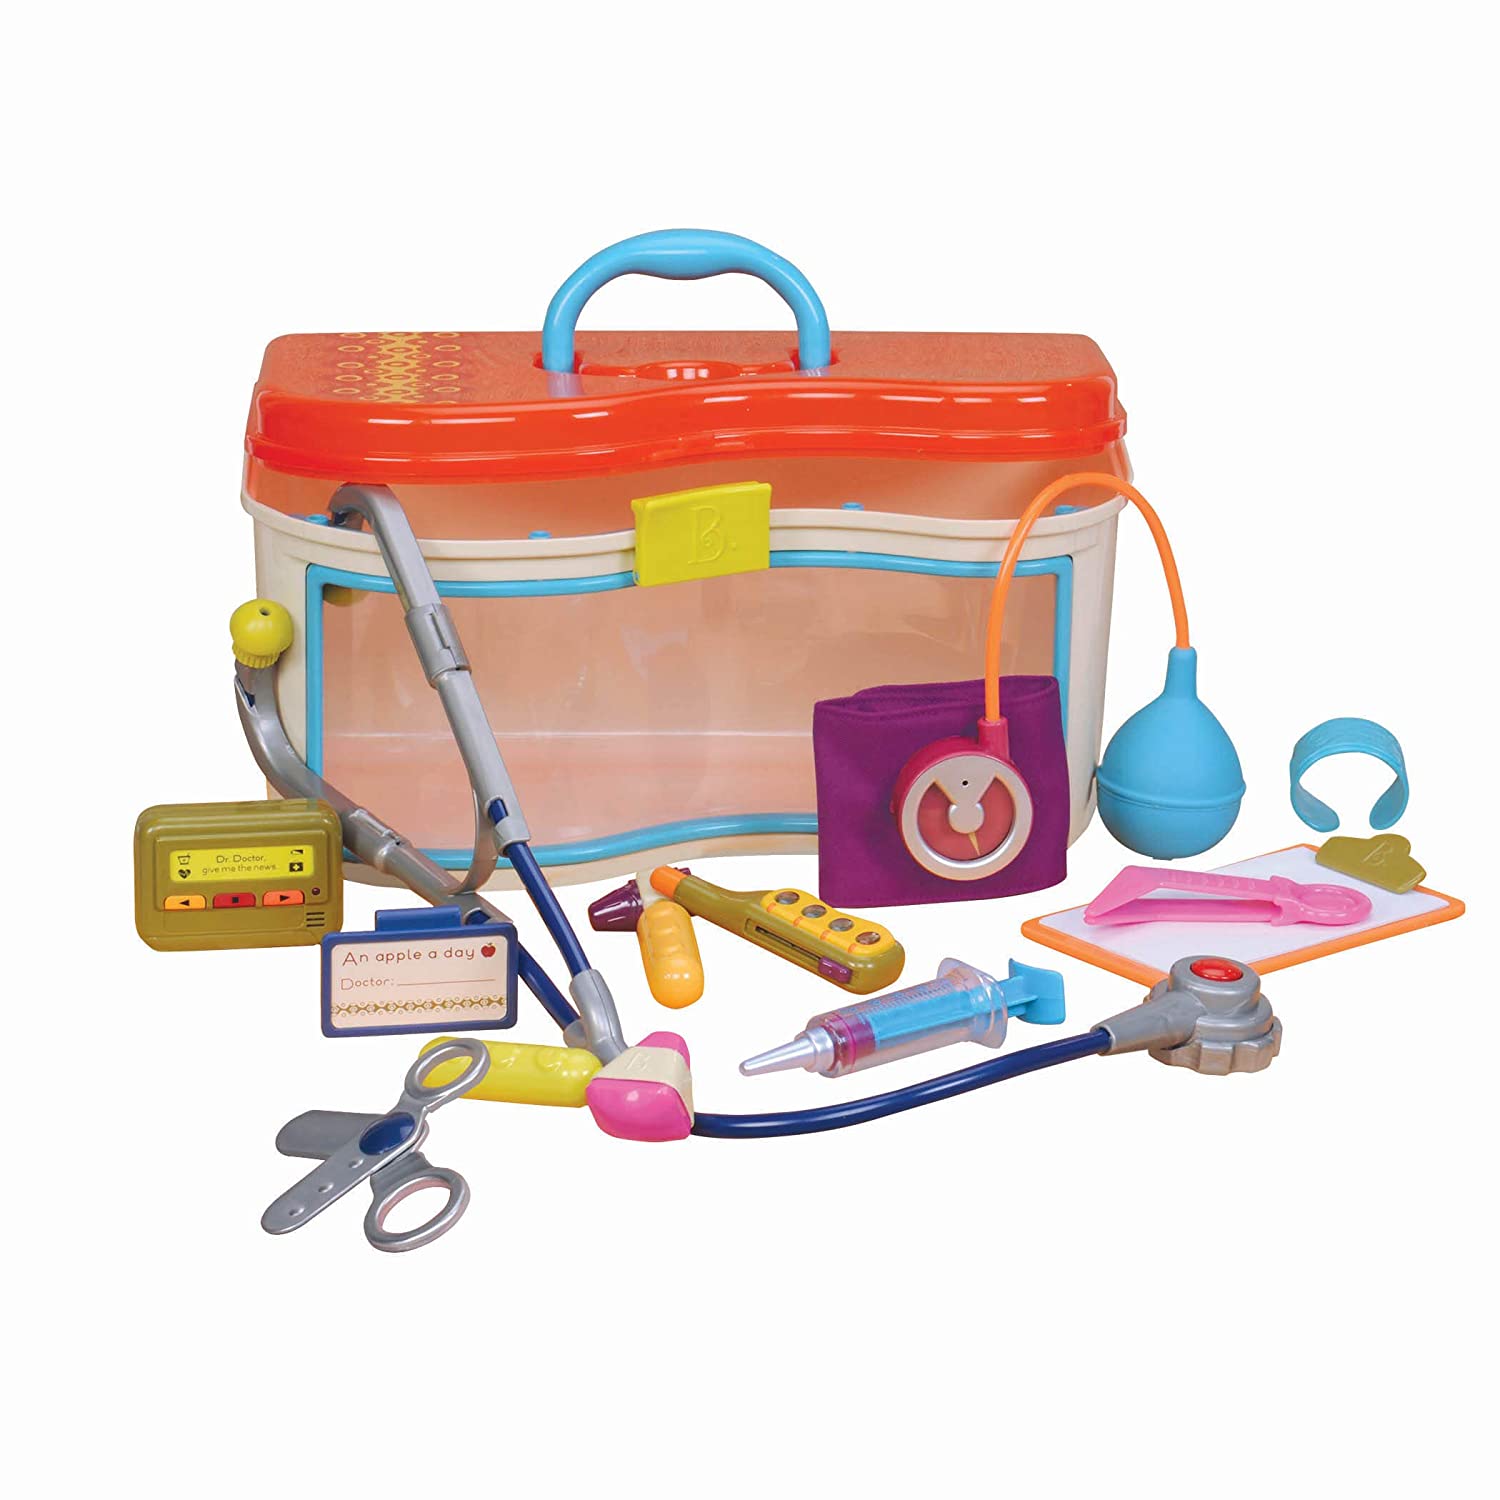 Top 9 Best Toy Doctor Kits Reviews in 2022 3